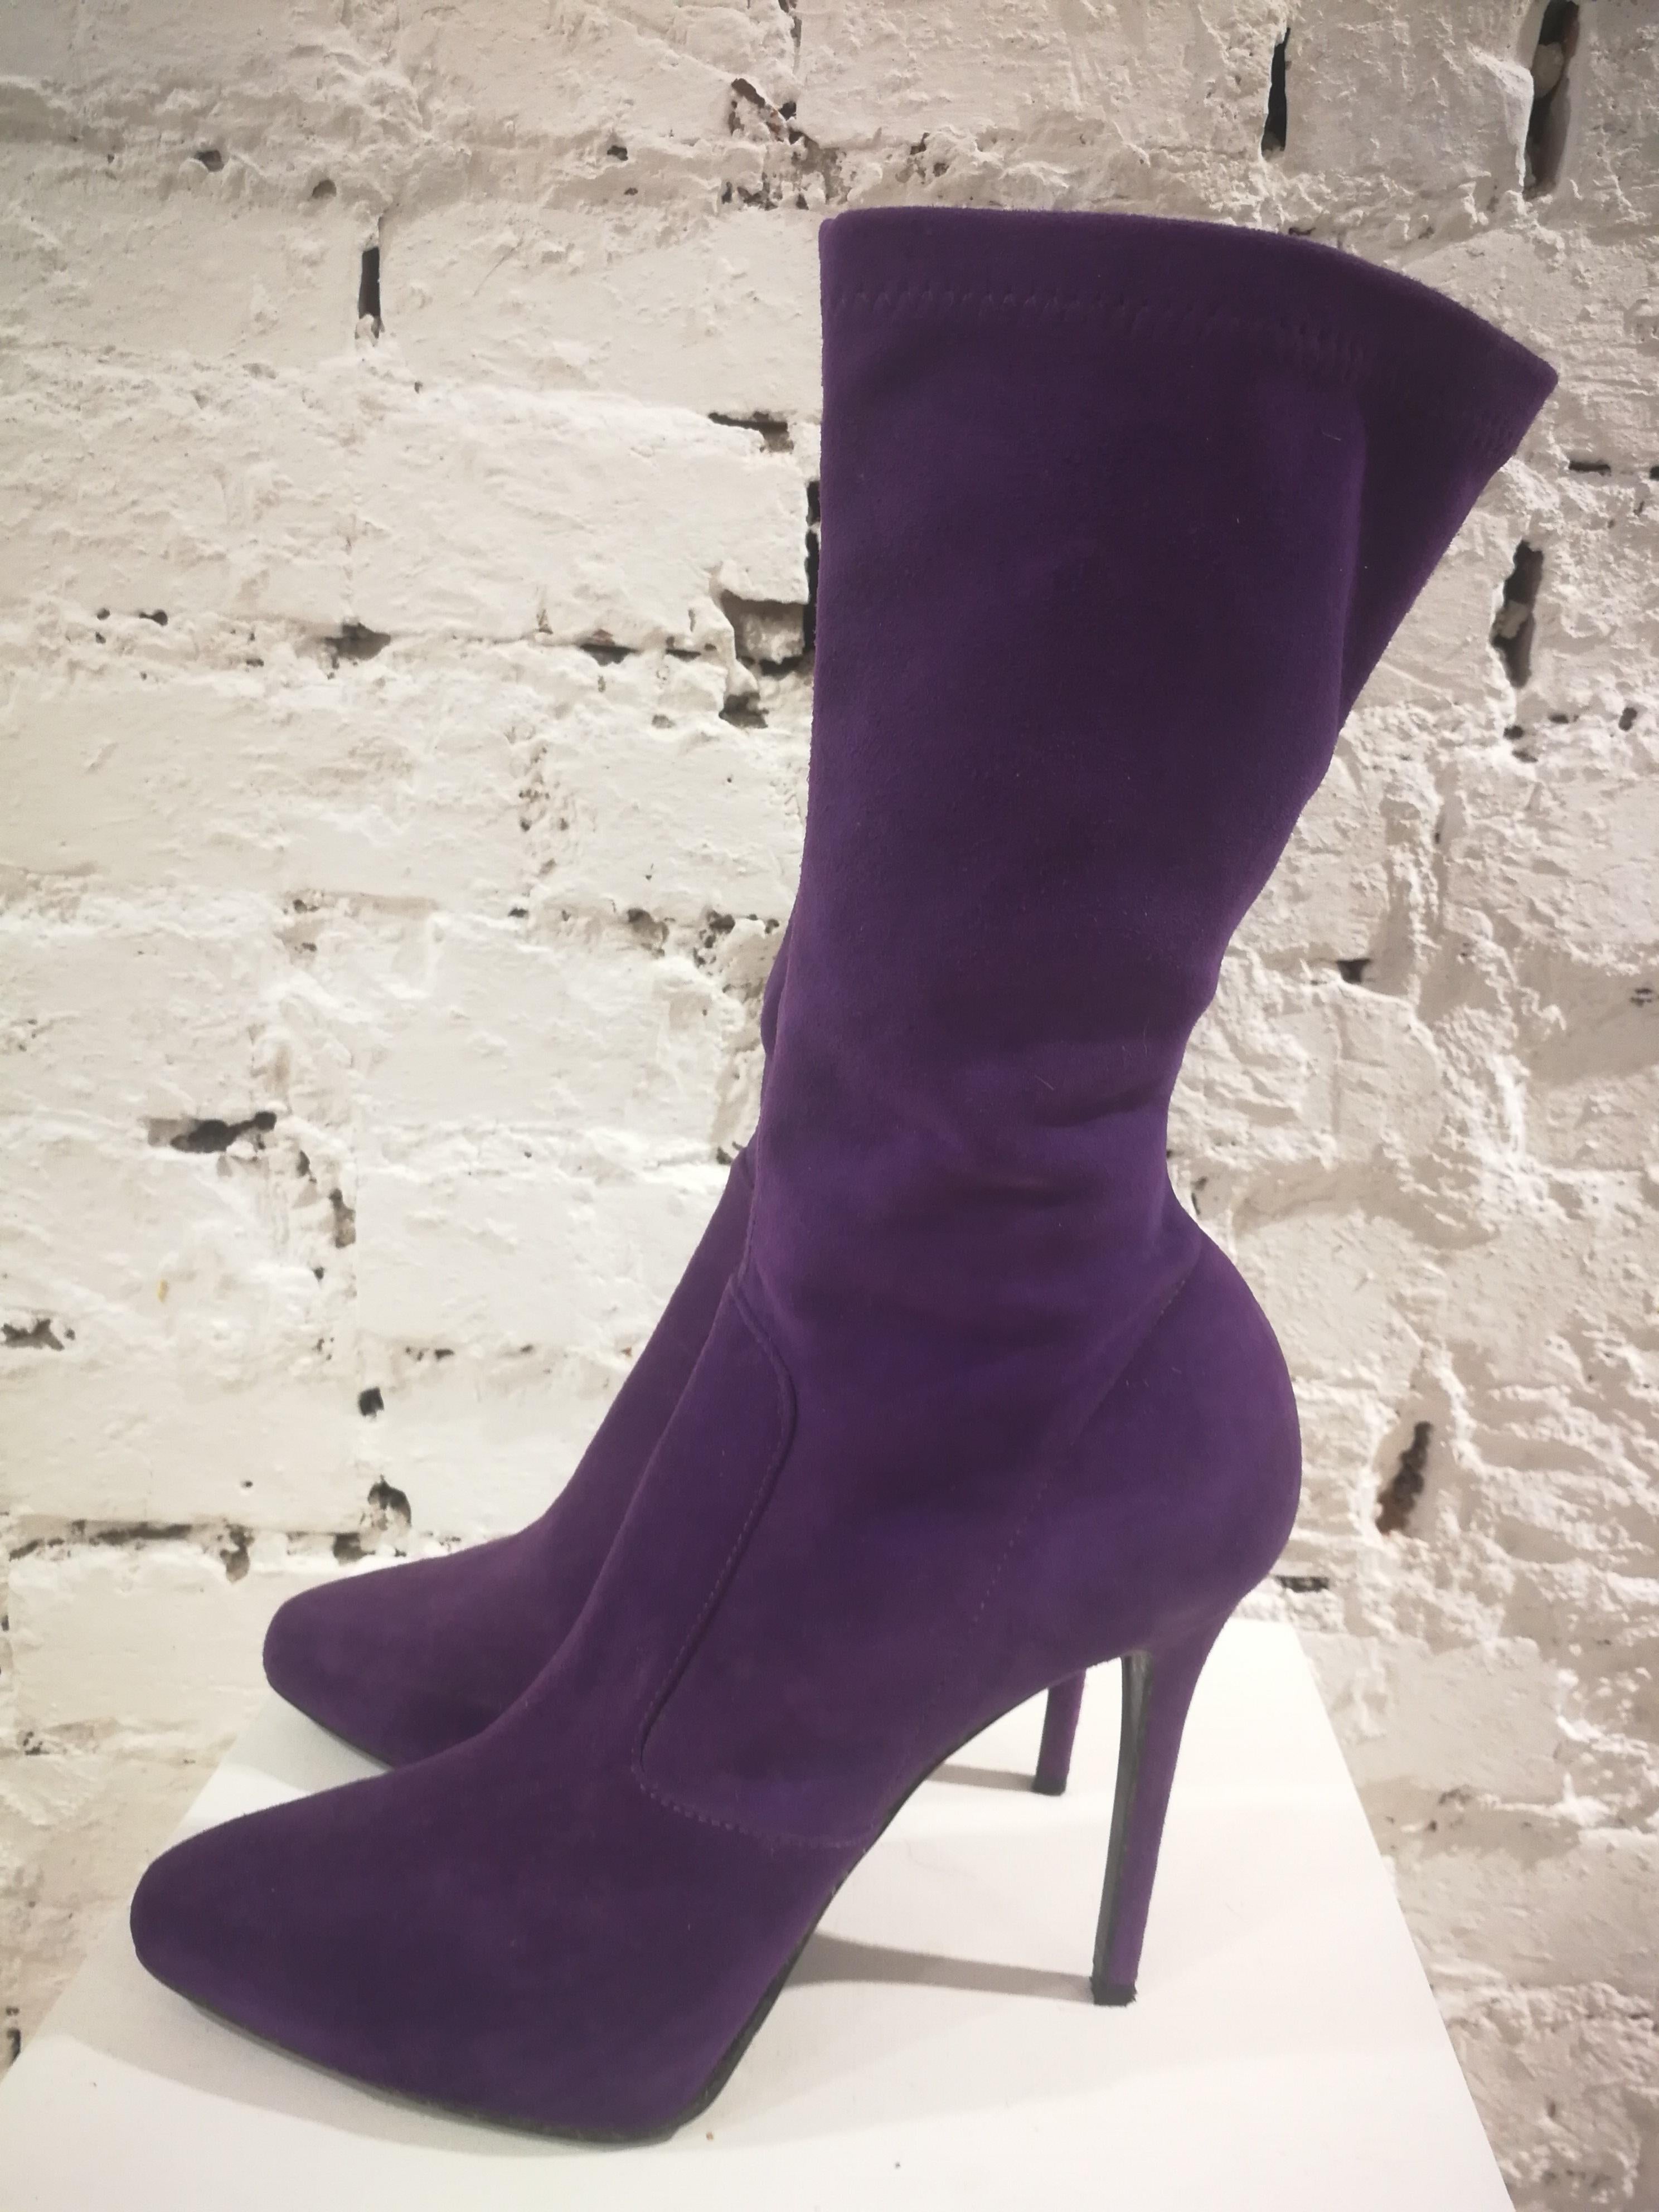 Le Silla Purple Suede Boots
Le Silla boots totally made in italy in size 40
Heels: 11 cm 